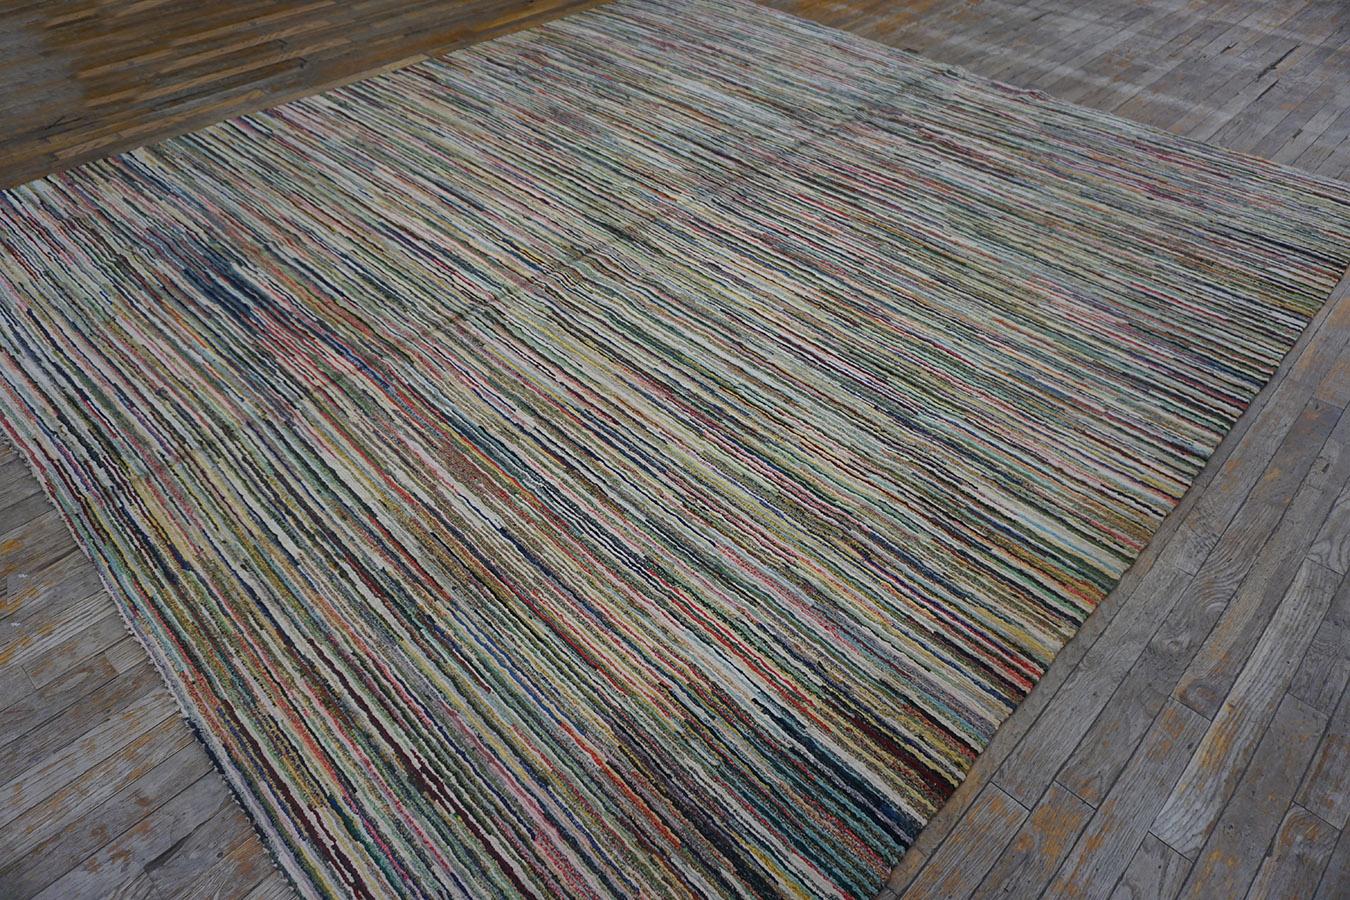 Hand-Woven Early 20th Century American Shaker Pile Carpet ( 8'6